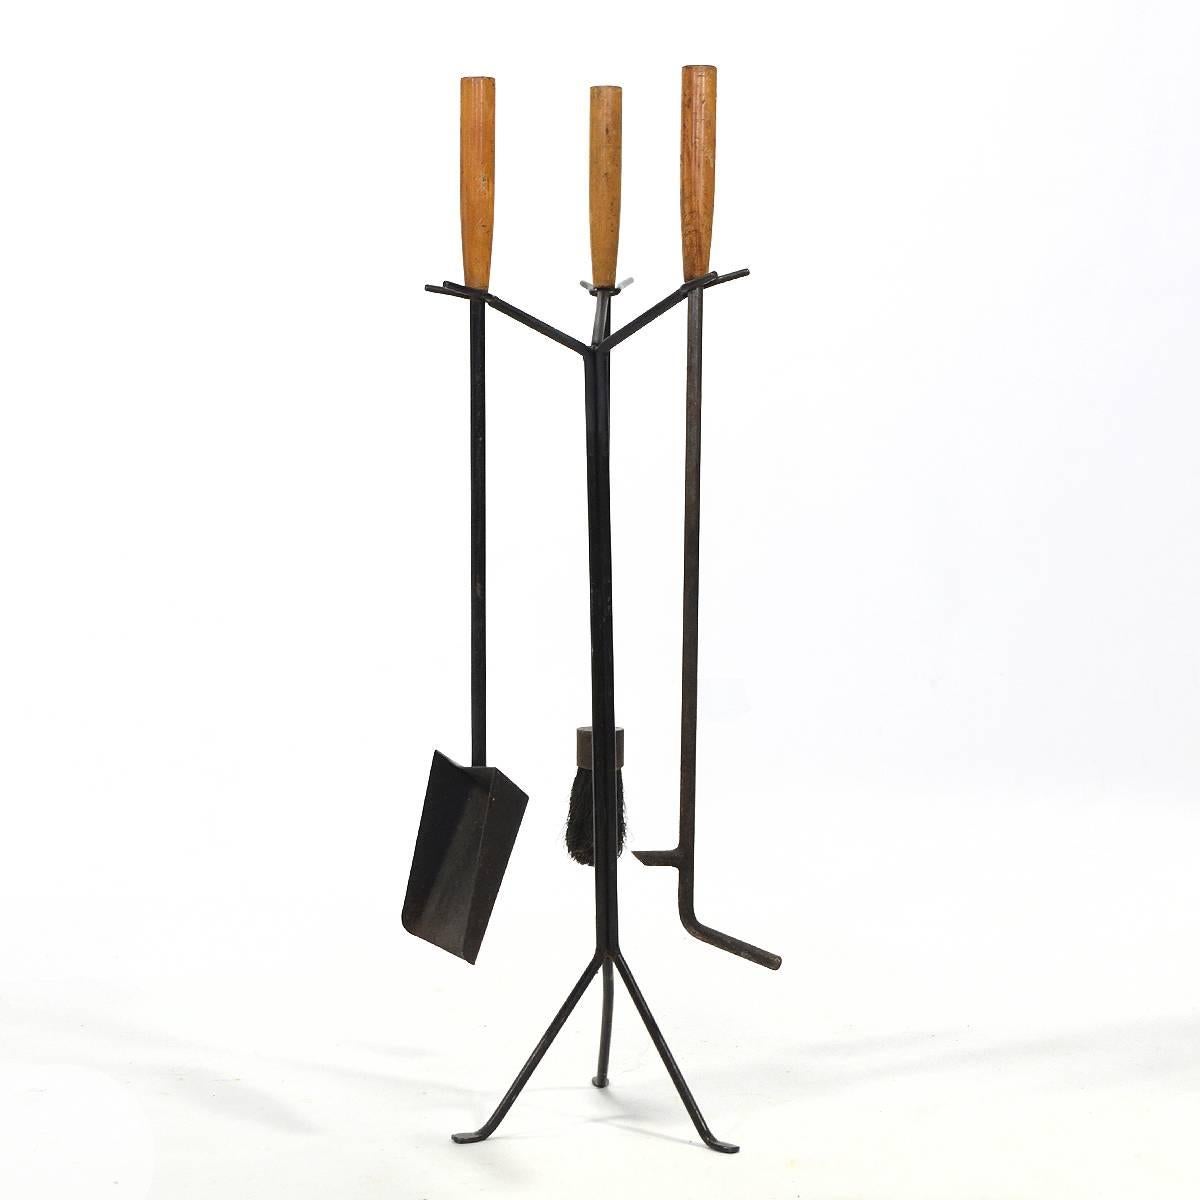 This set of model H609 fireplace accessories designed by George Nelson for Howard Miller have a clean, spare design and are supported by a tripod stand. They have acquired a rich patina from years of use.